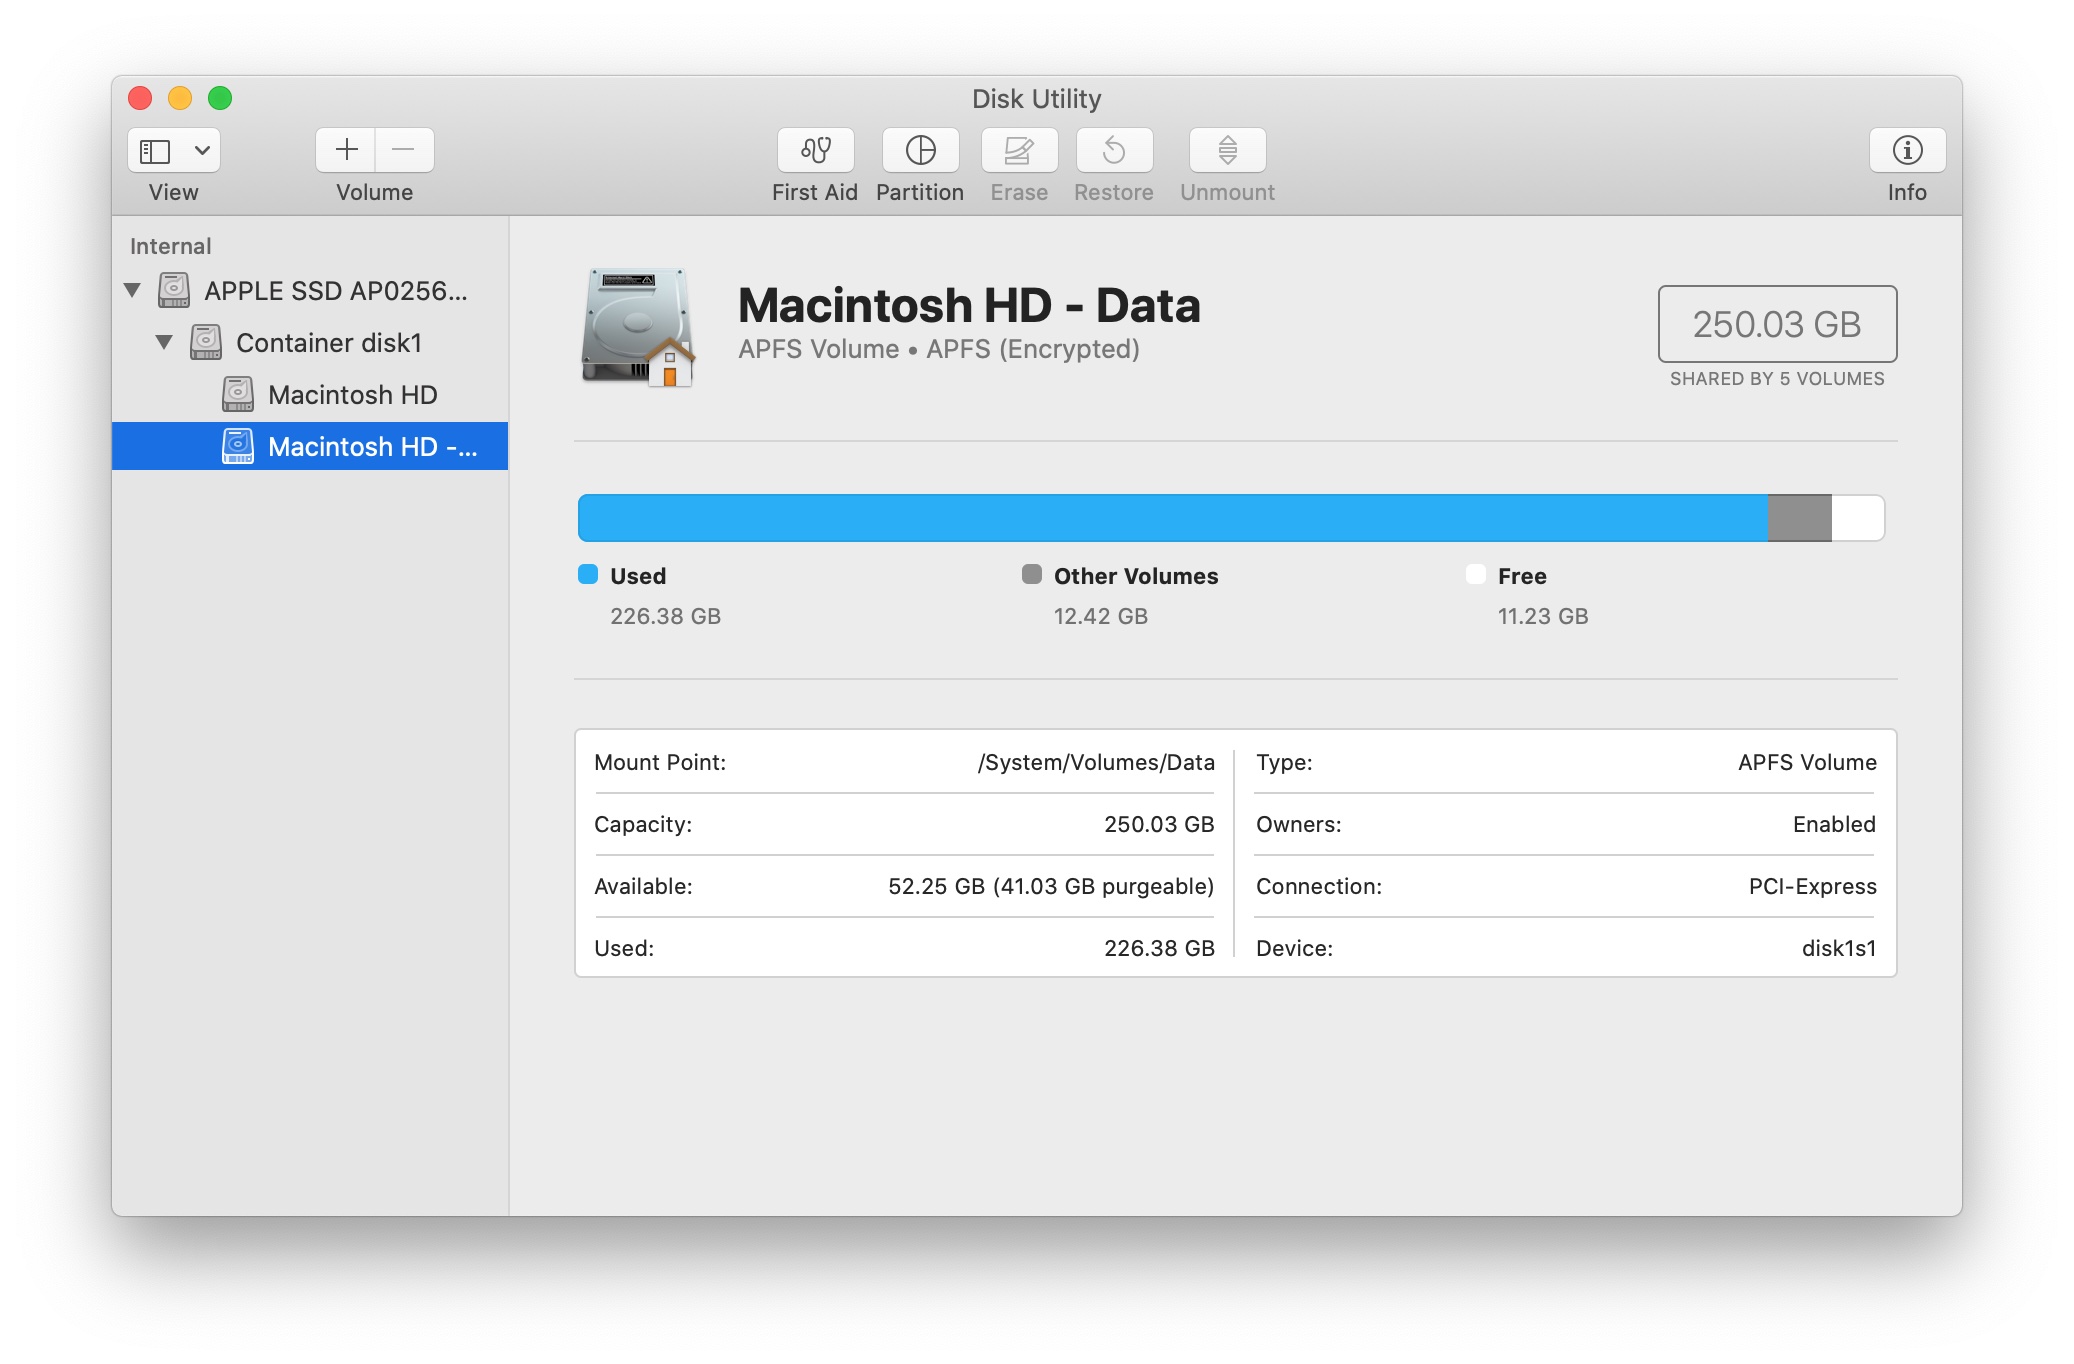 Interface of Disk Utility